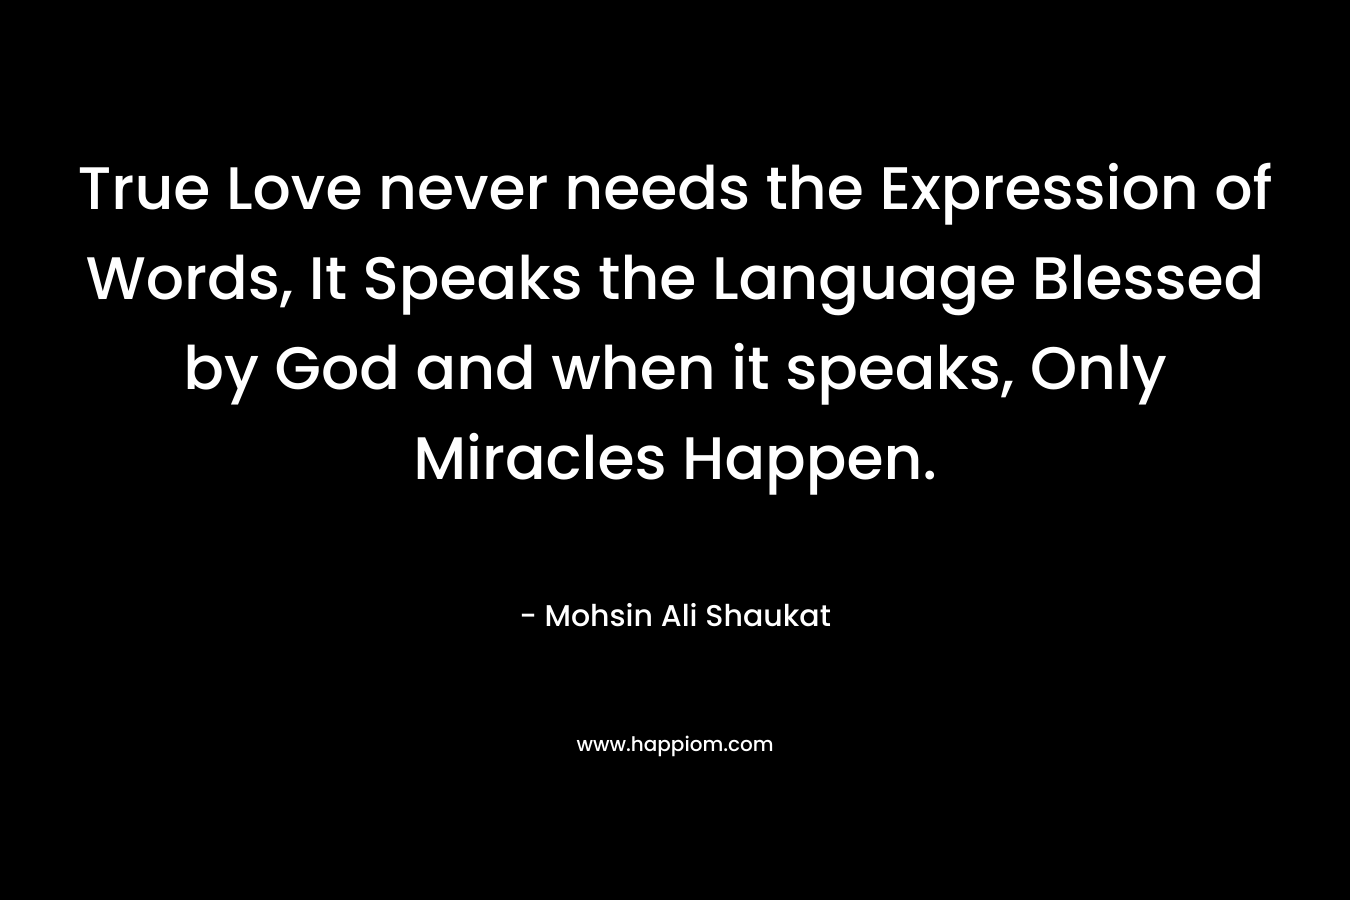 True Love never needs the Expression of Words, It Speaks the Language Blessed by God and when it speaks, Only Miracles Happen.